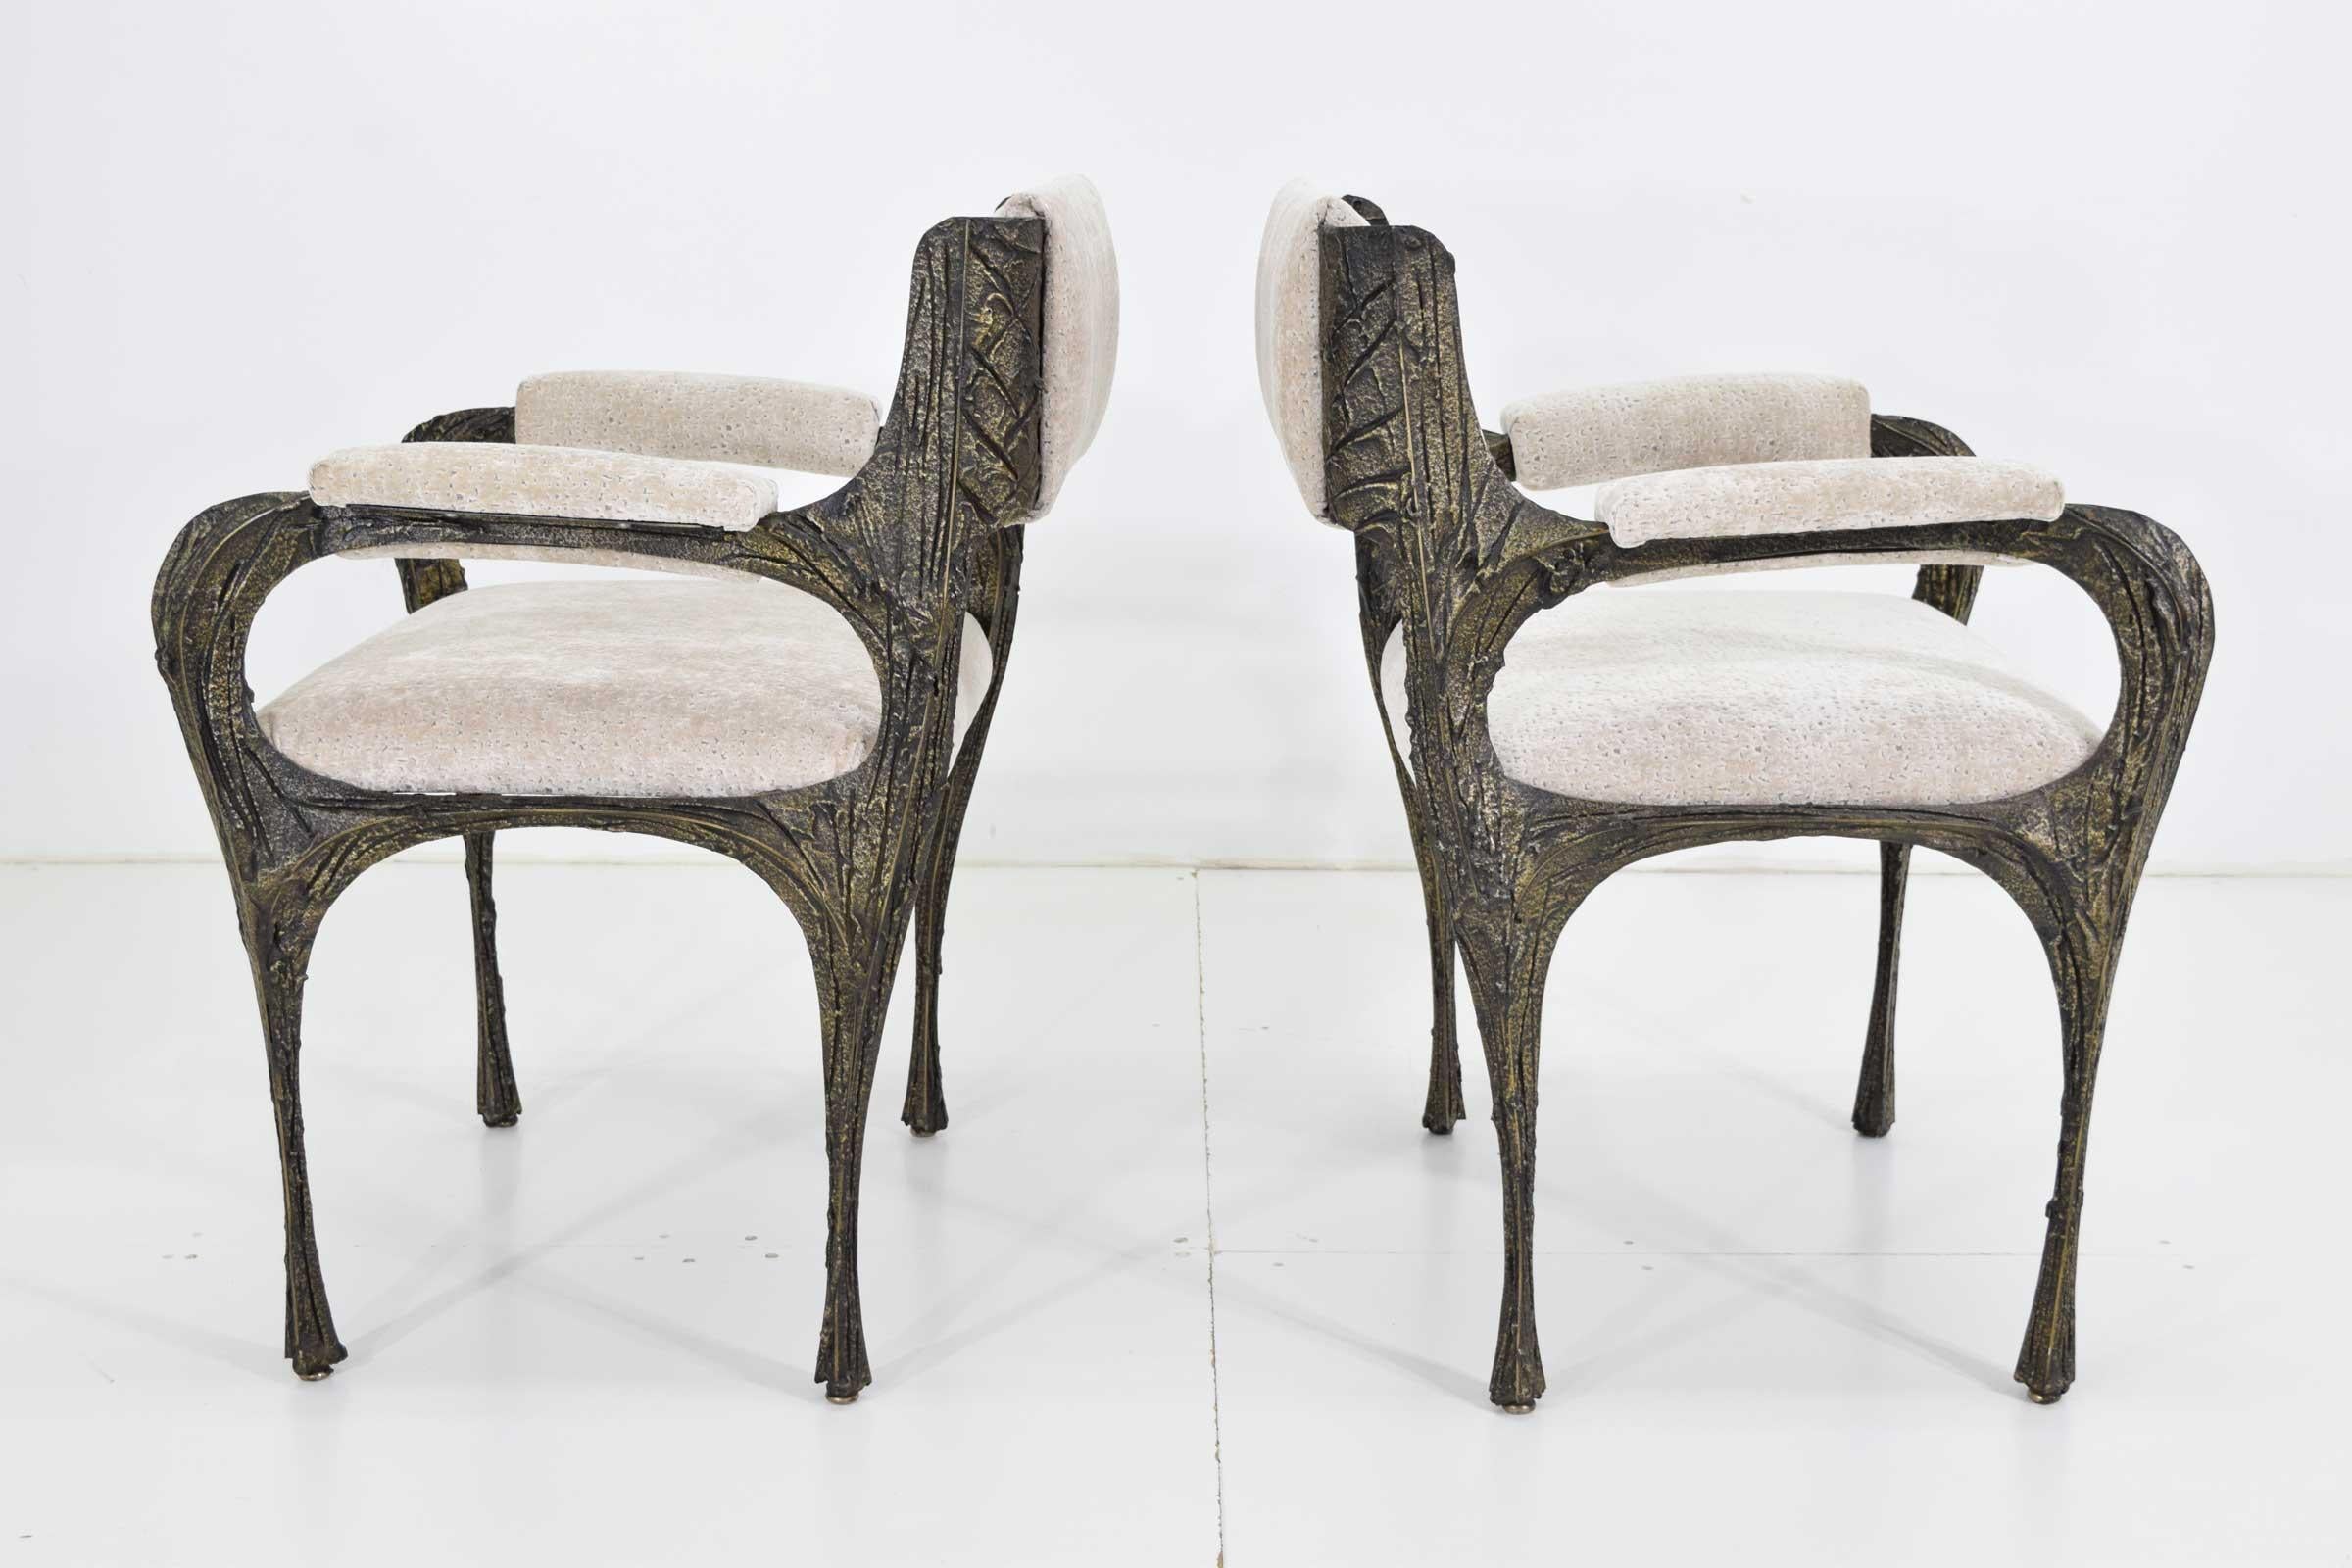 20th Century Set of Six Paul Evans Brutalist Sculpted Bronze and Resin Dining Chairs, 1972